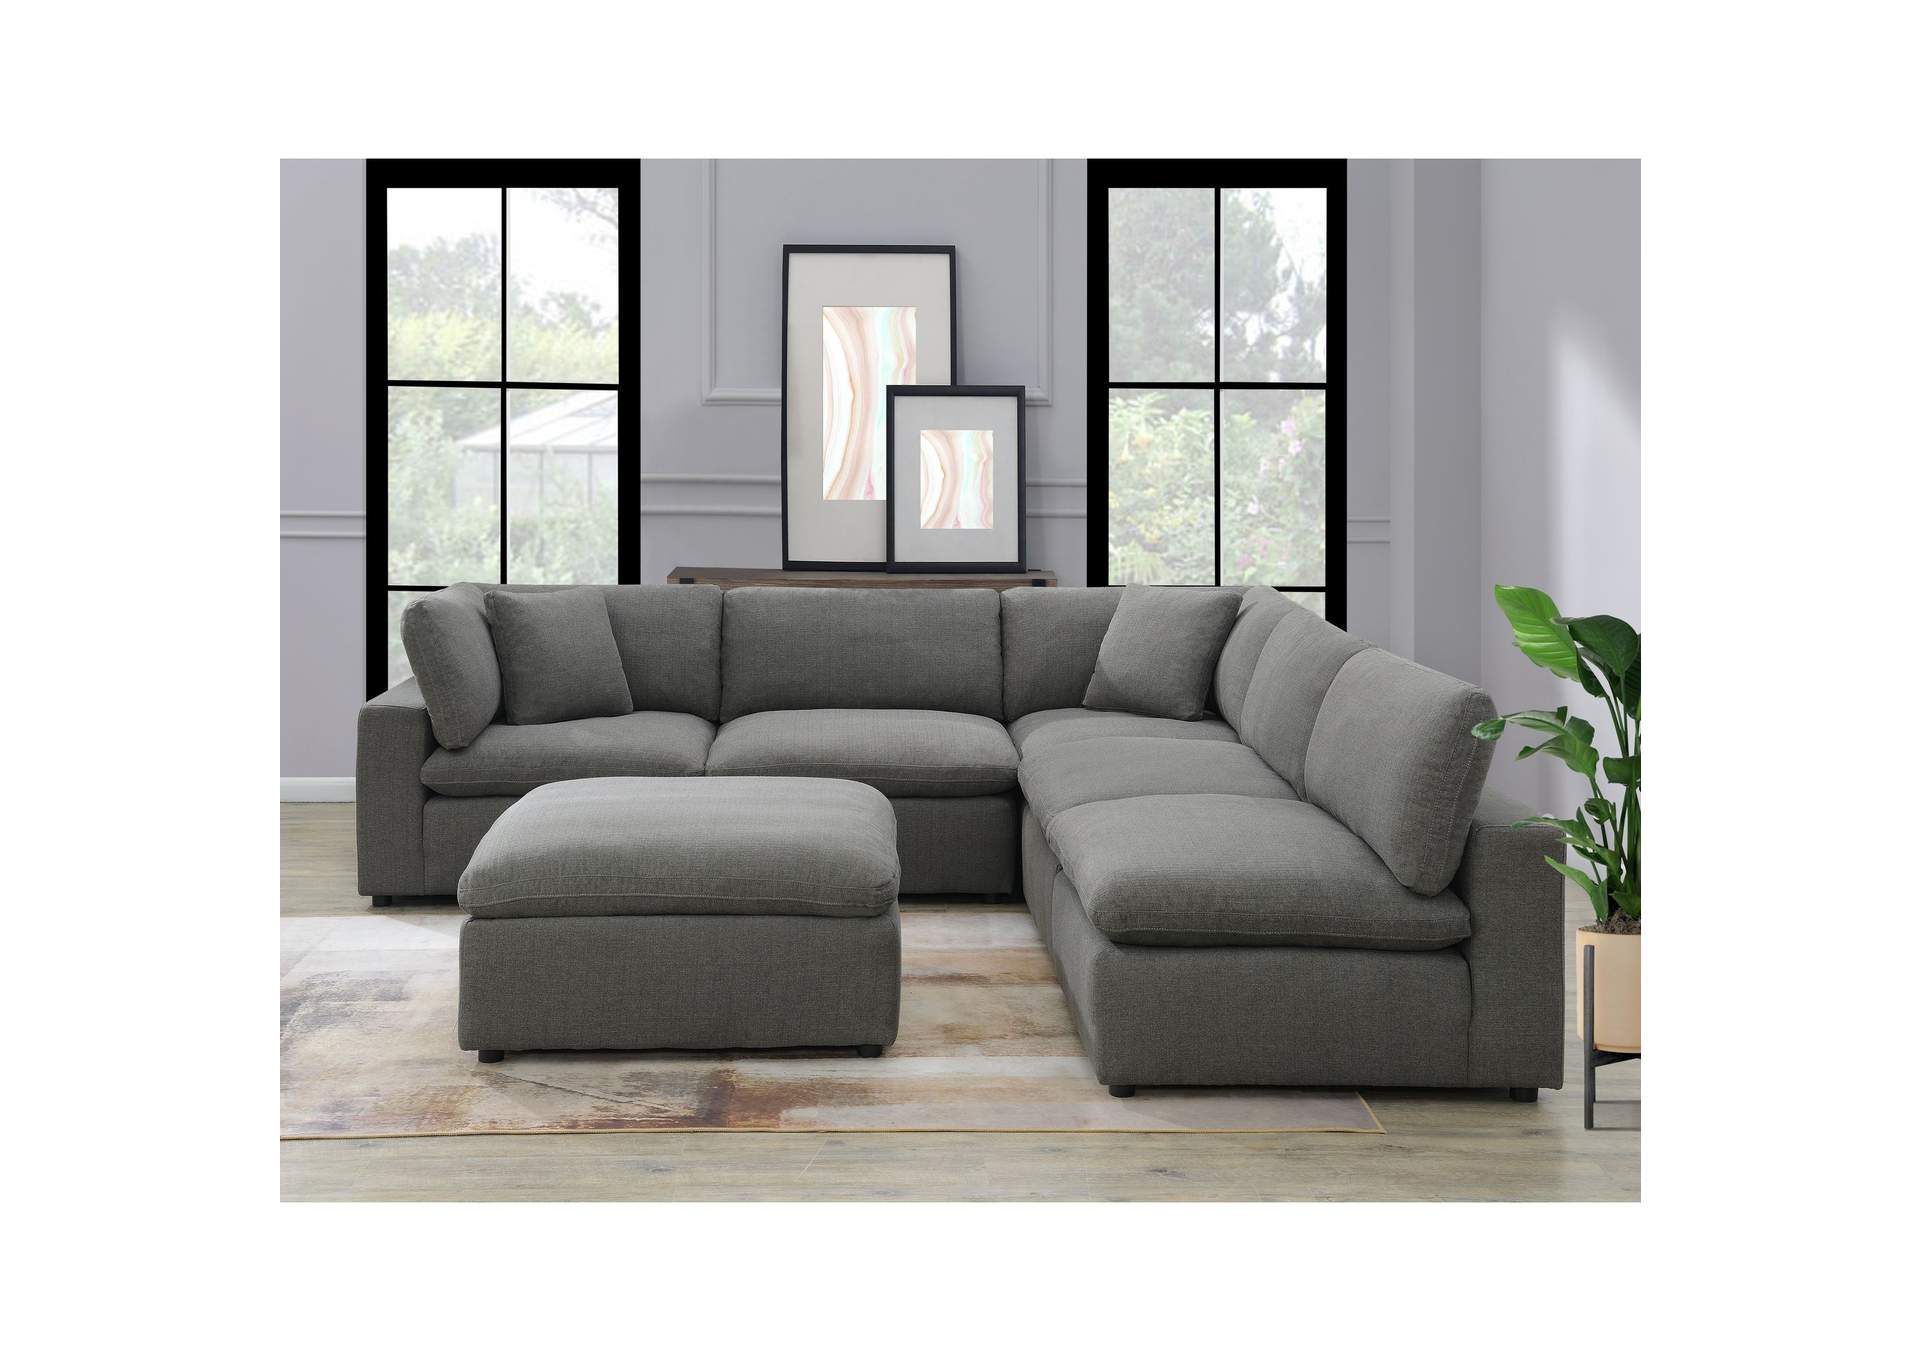 Cloud 9 Sectional Ottoman In Garrison Charcoal,Elements